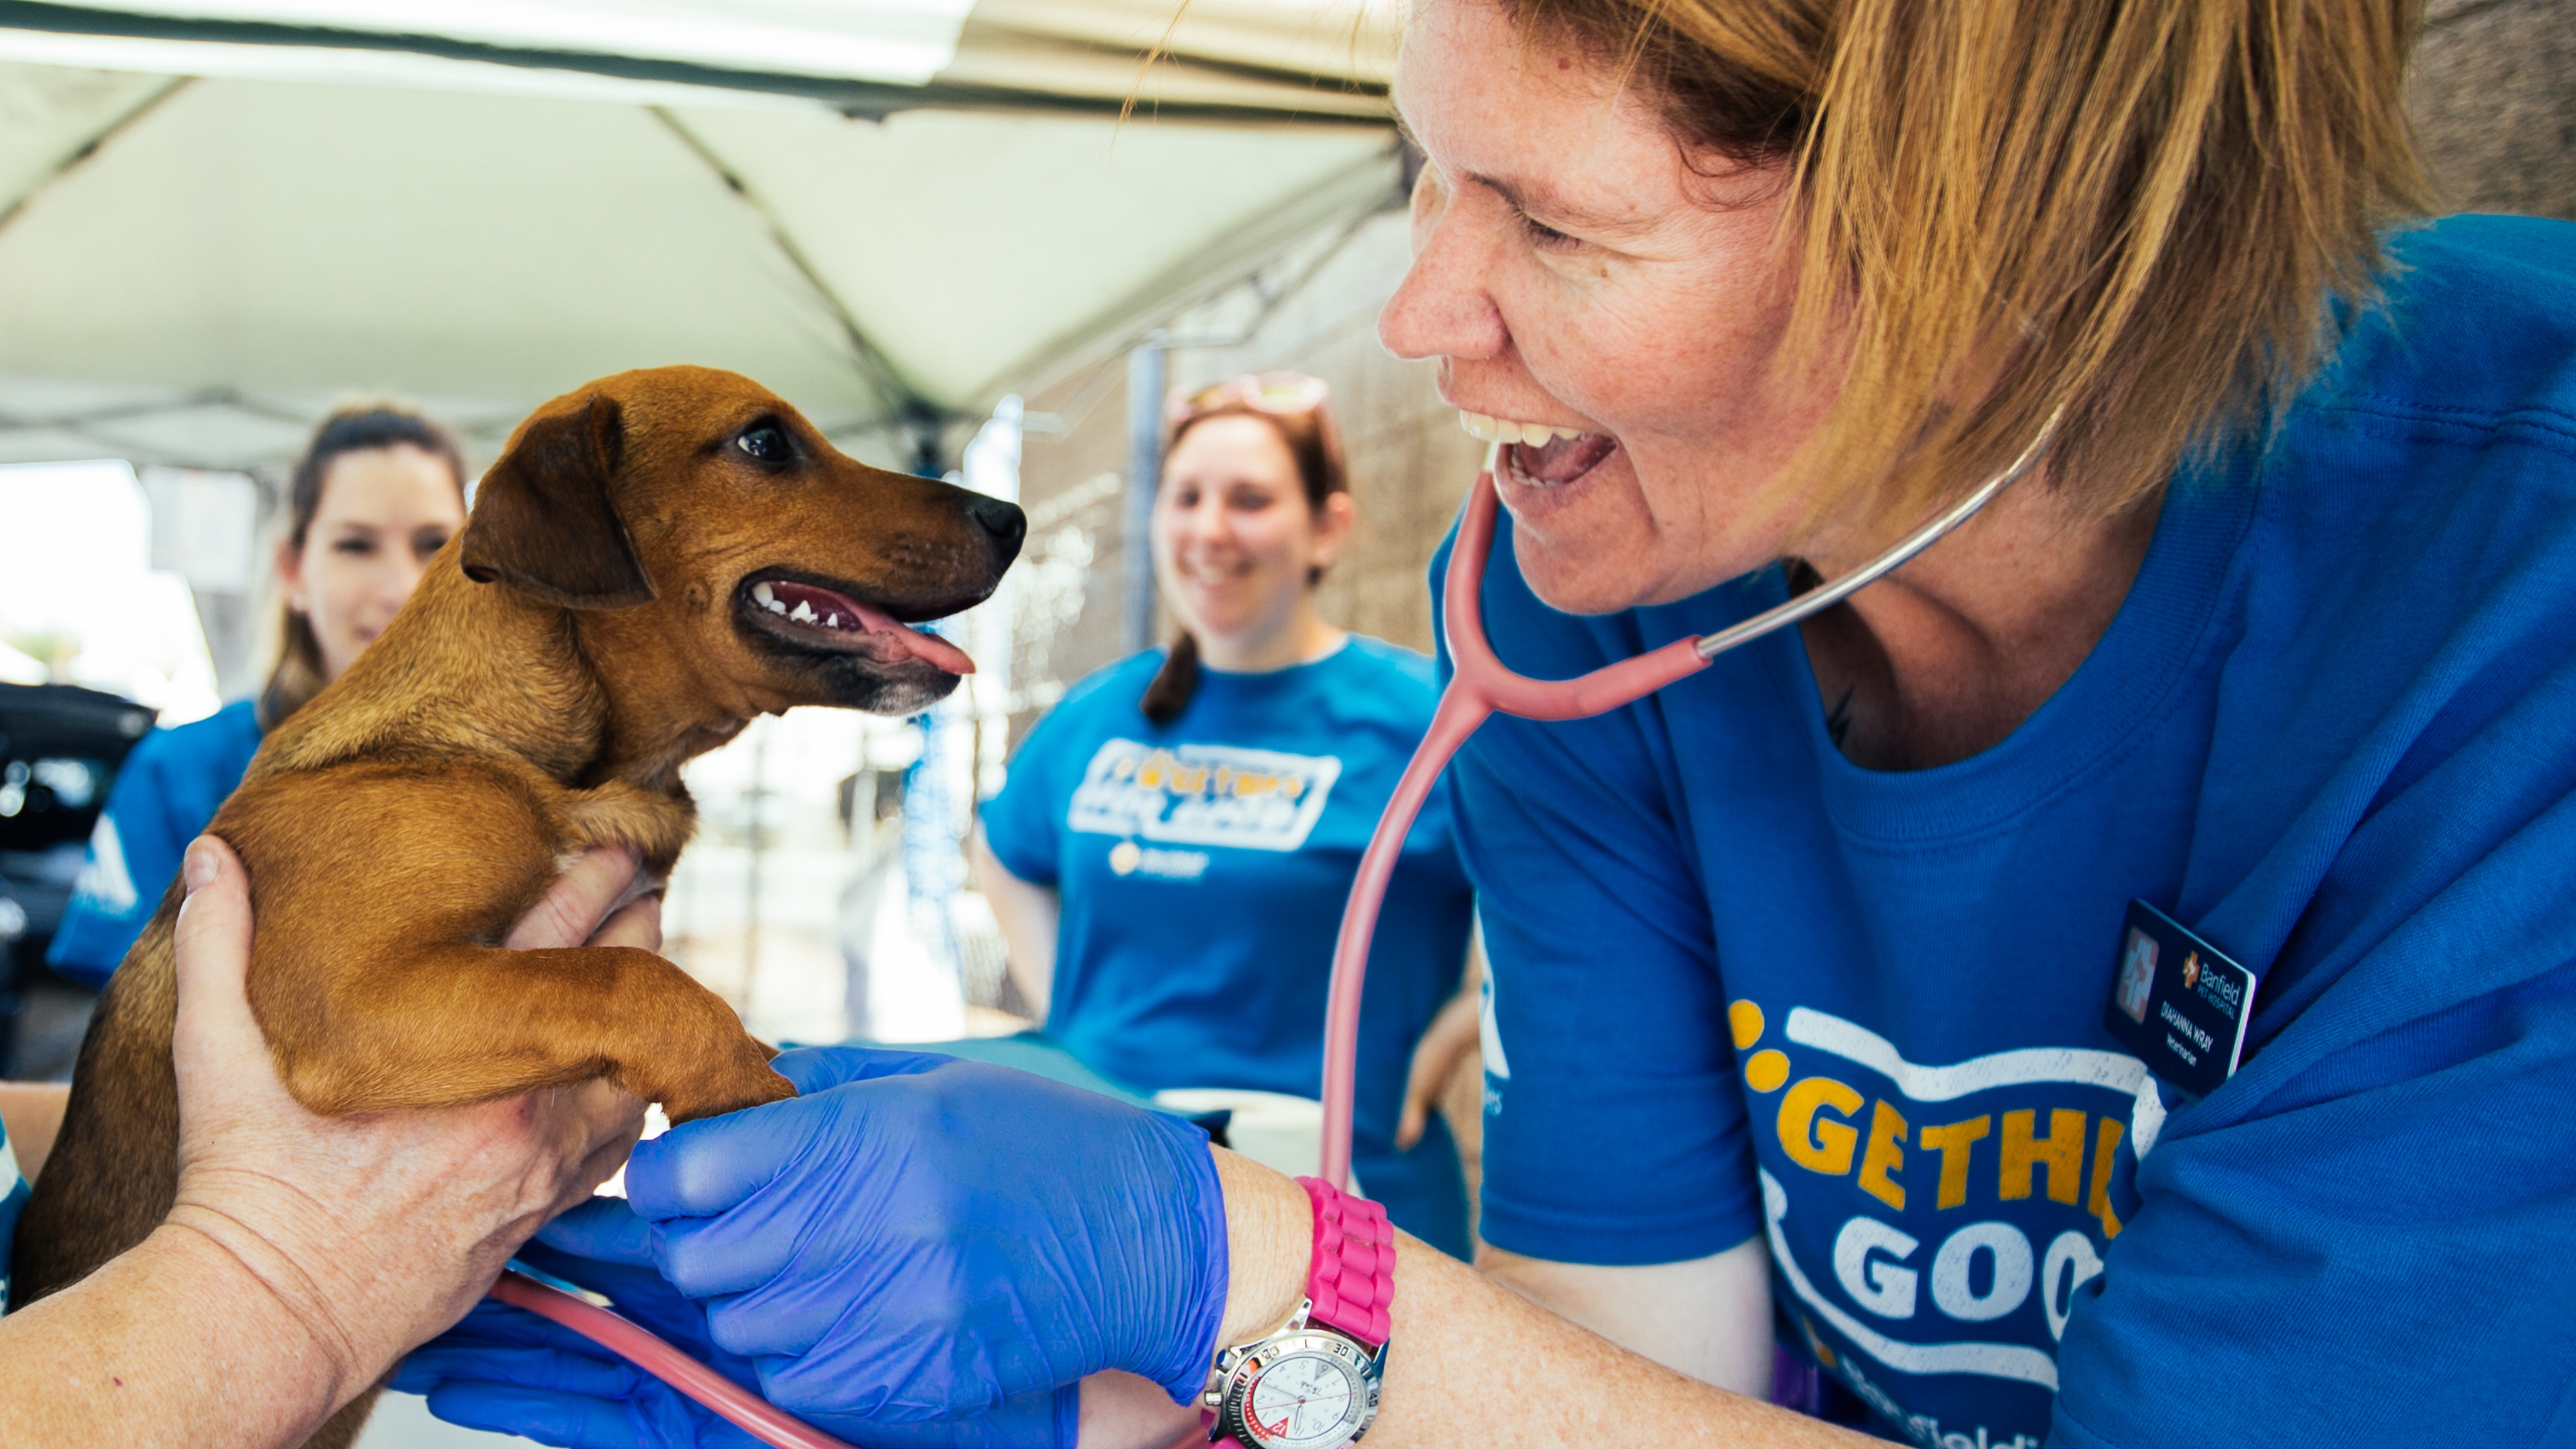 every pet deserves access to veterinary care